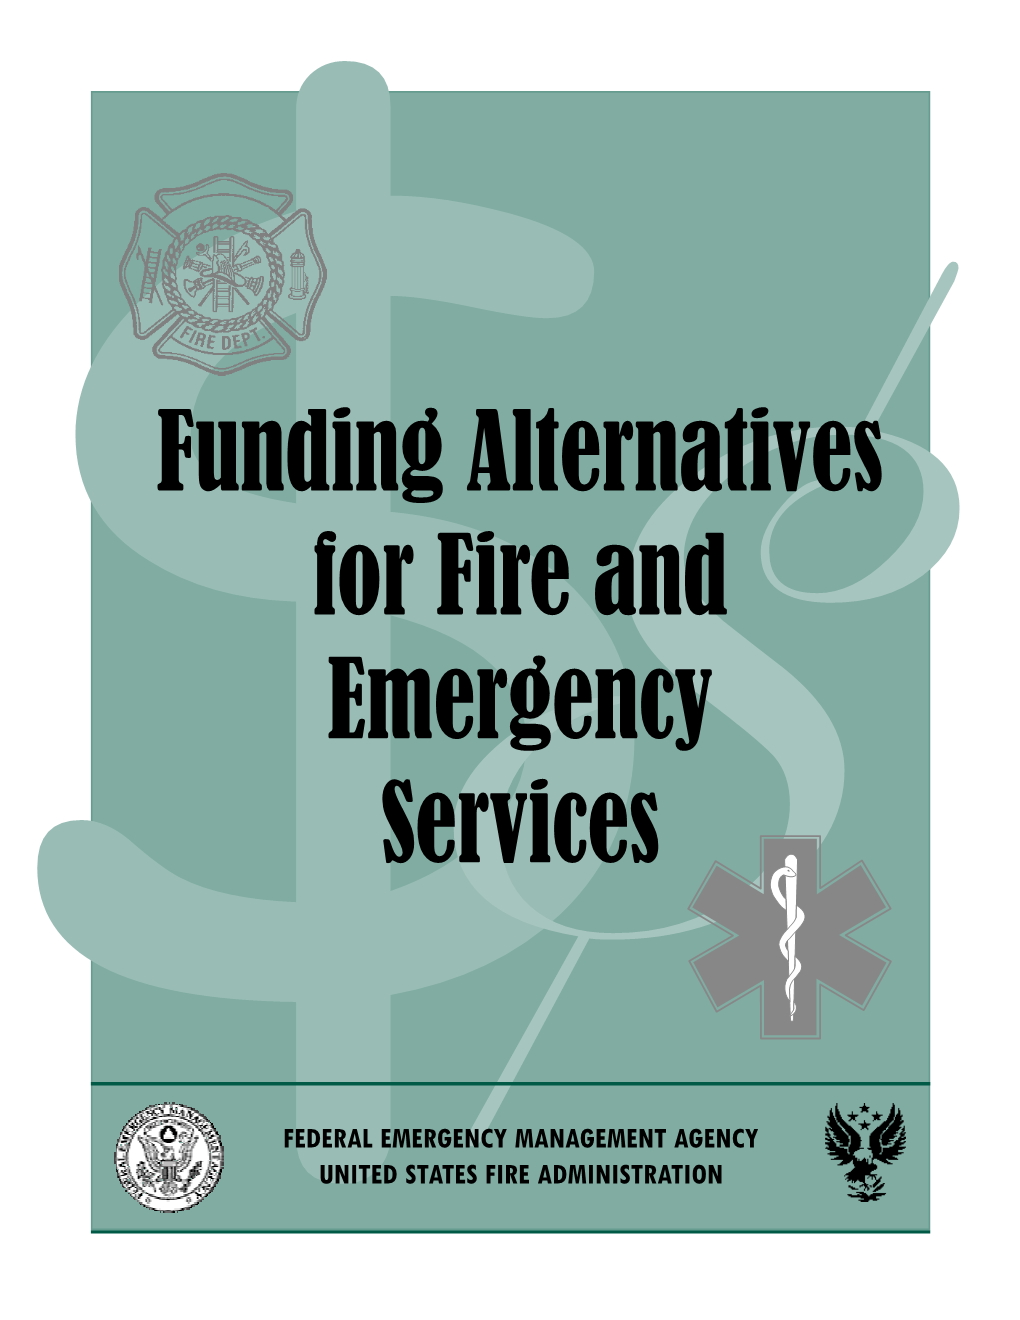 Funding Alternatives for Fire and Emergency Services